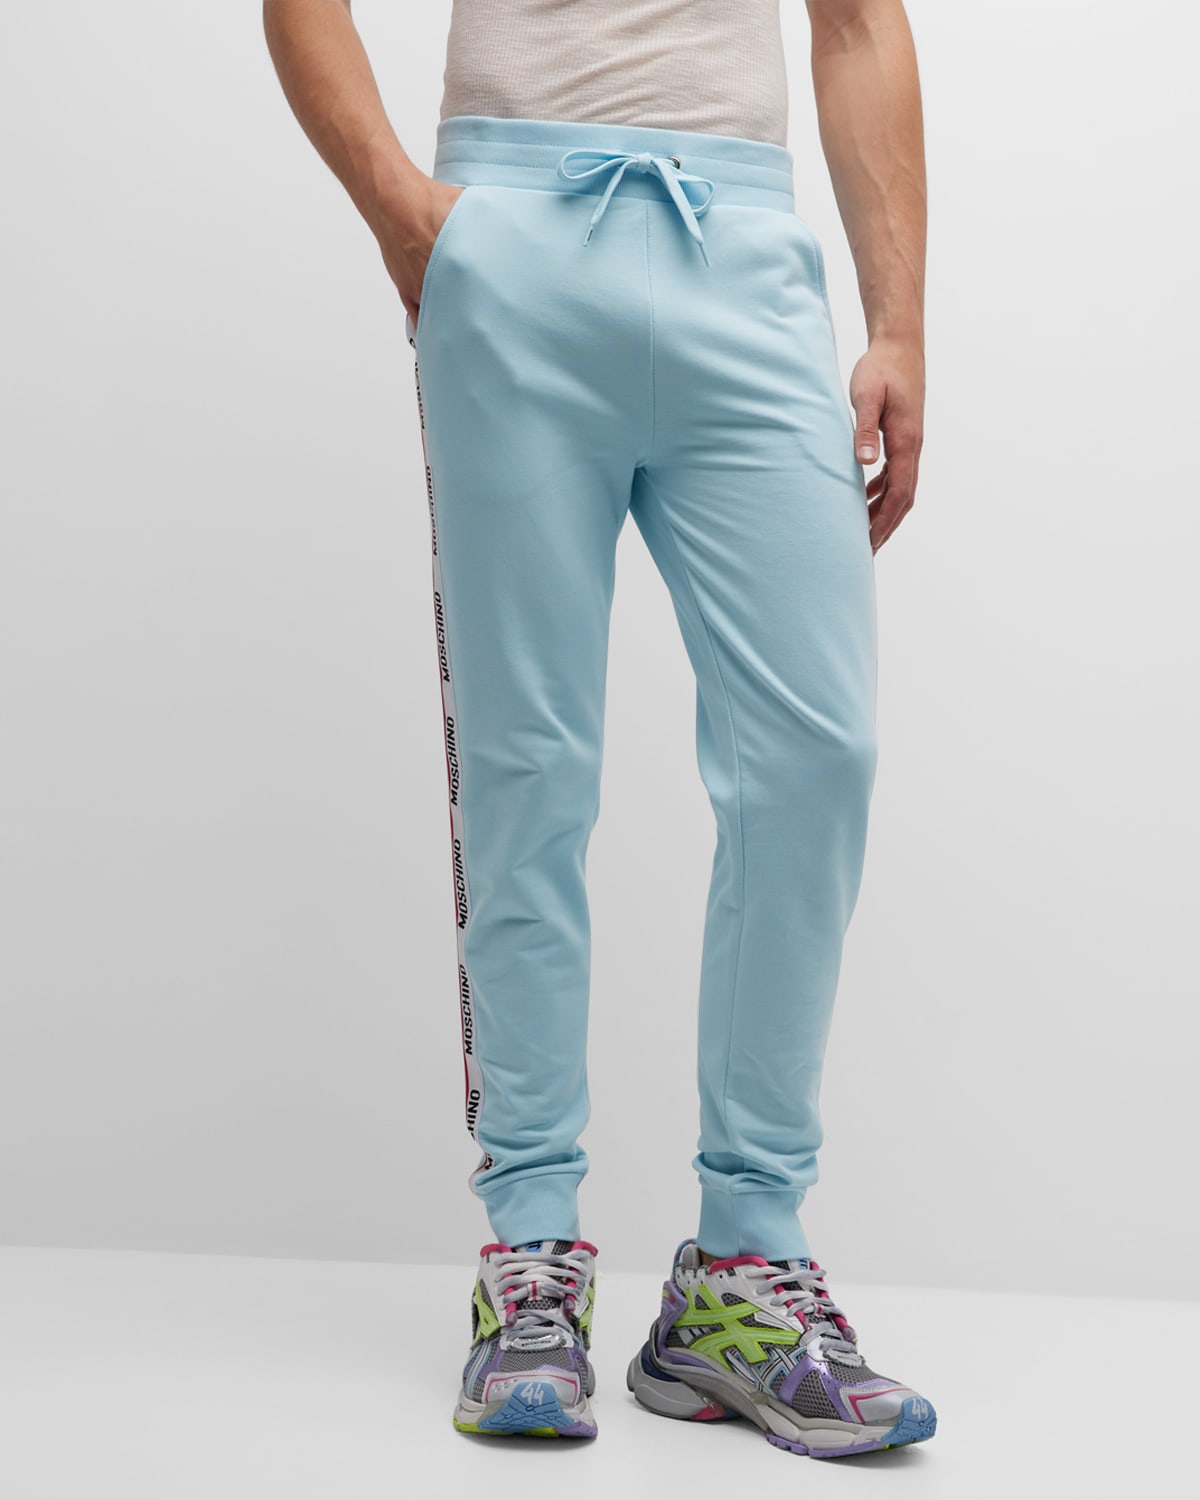 Moschino Men's Sweatpants With Side Taping In Light Blue